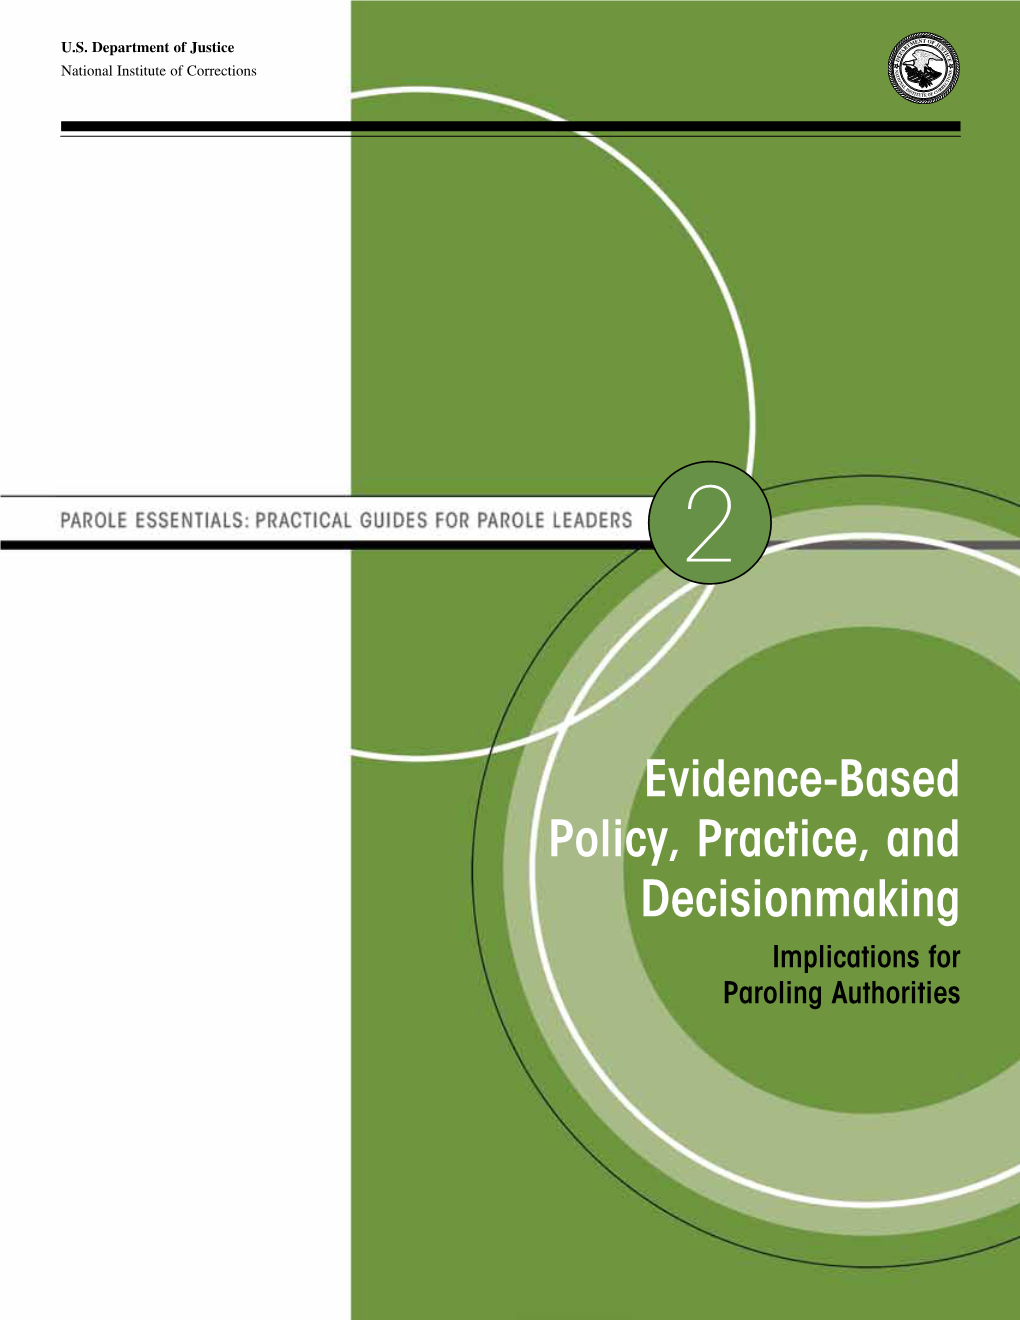 Evidence-Based Policy, Practice, and Decisionmaking: Implications